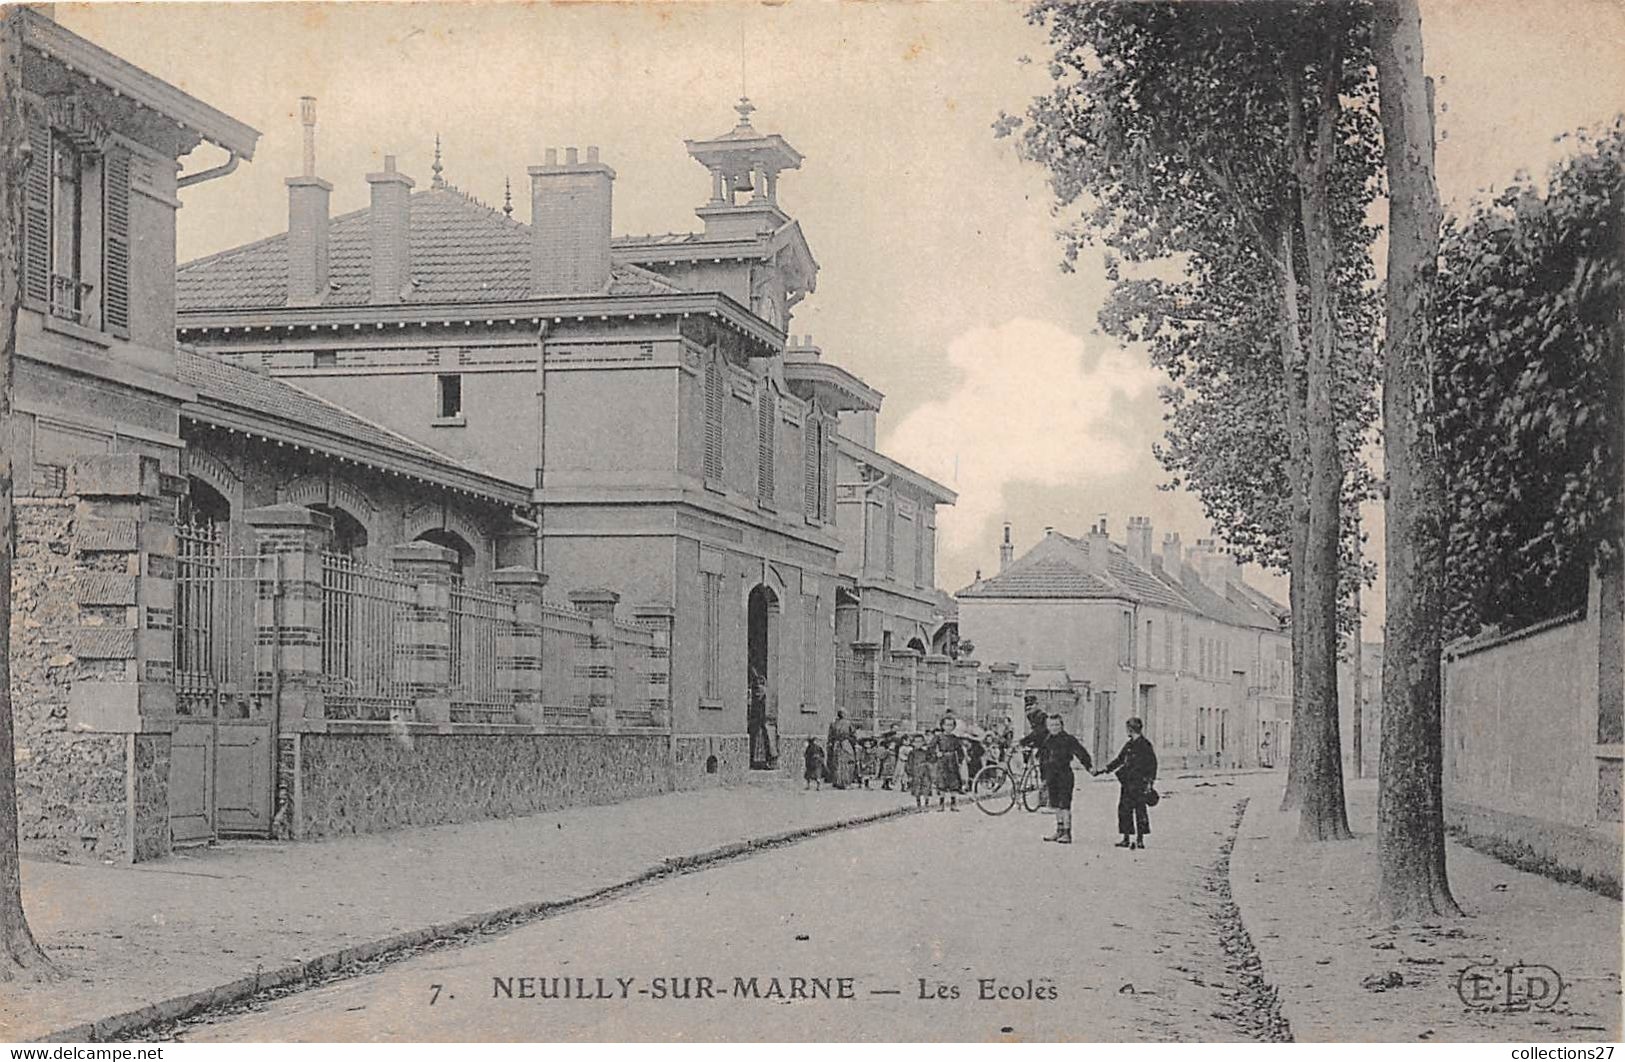 93-NEUILLY-SUR-MARNE- LES ECOLES - Neuilly Sur Marne